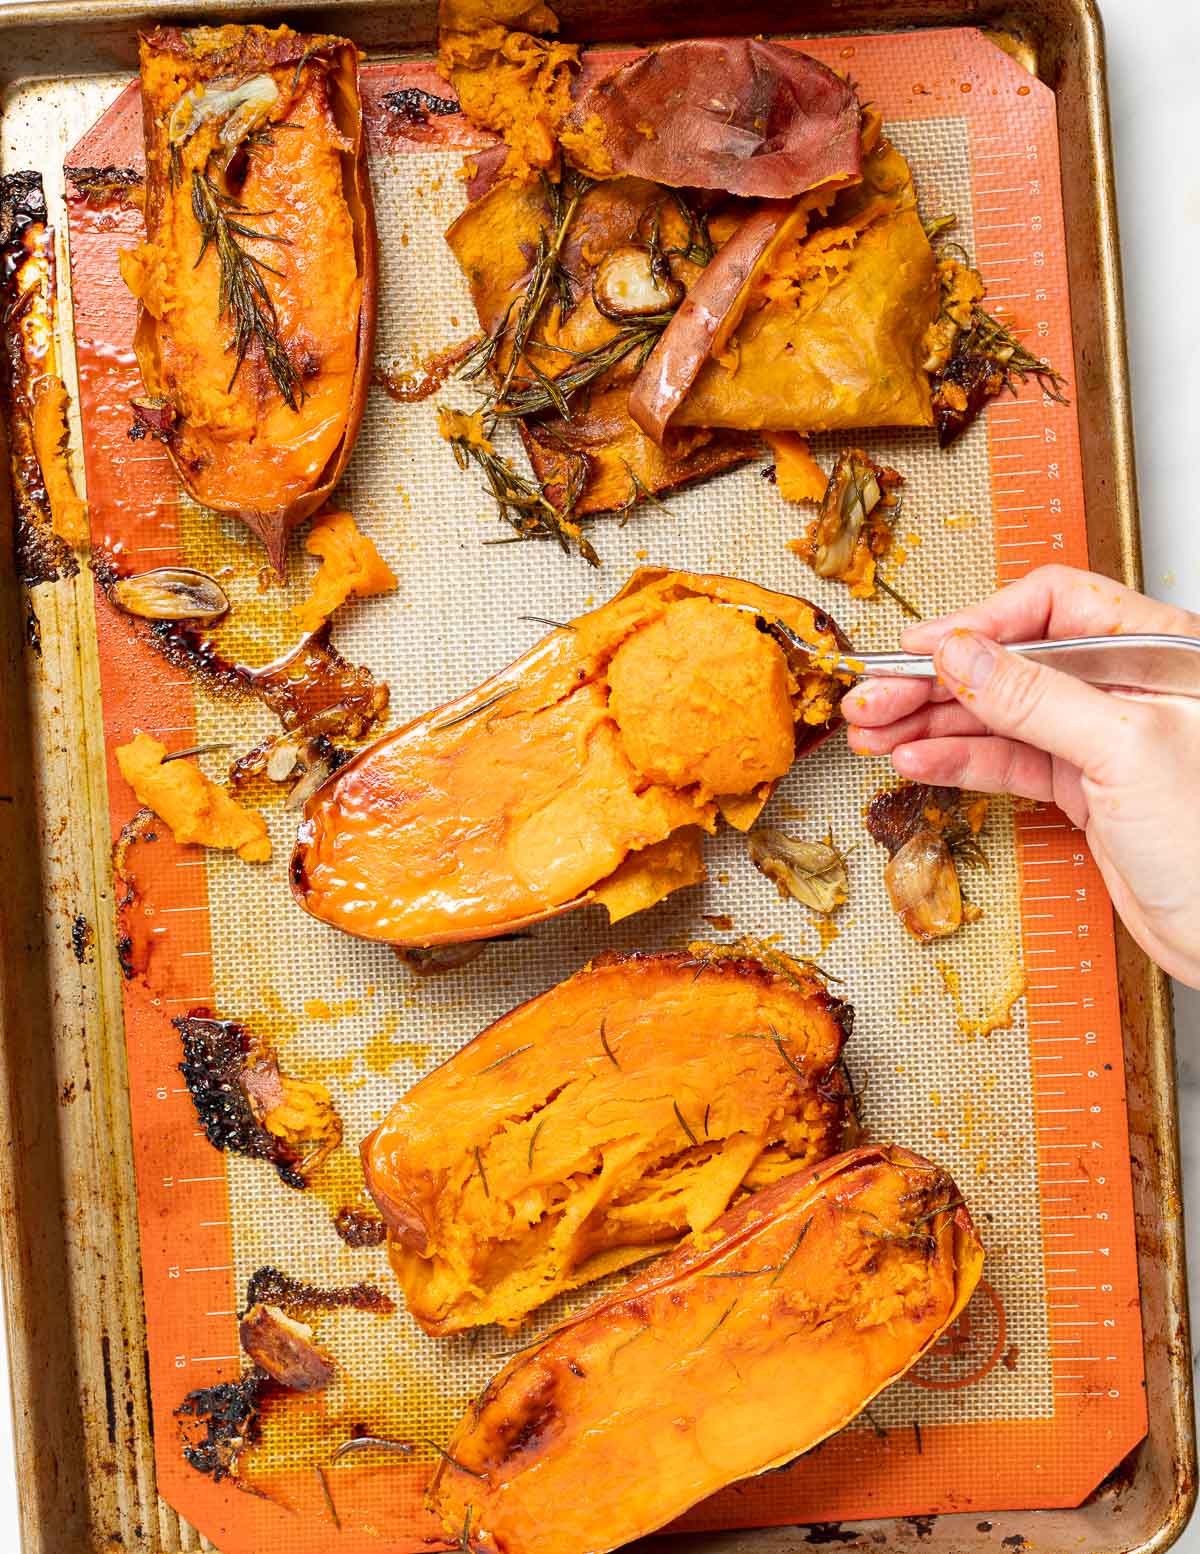 roasted sweet potatoes with garlic and rosemary on a baking tray